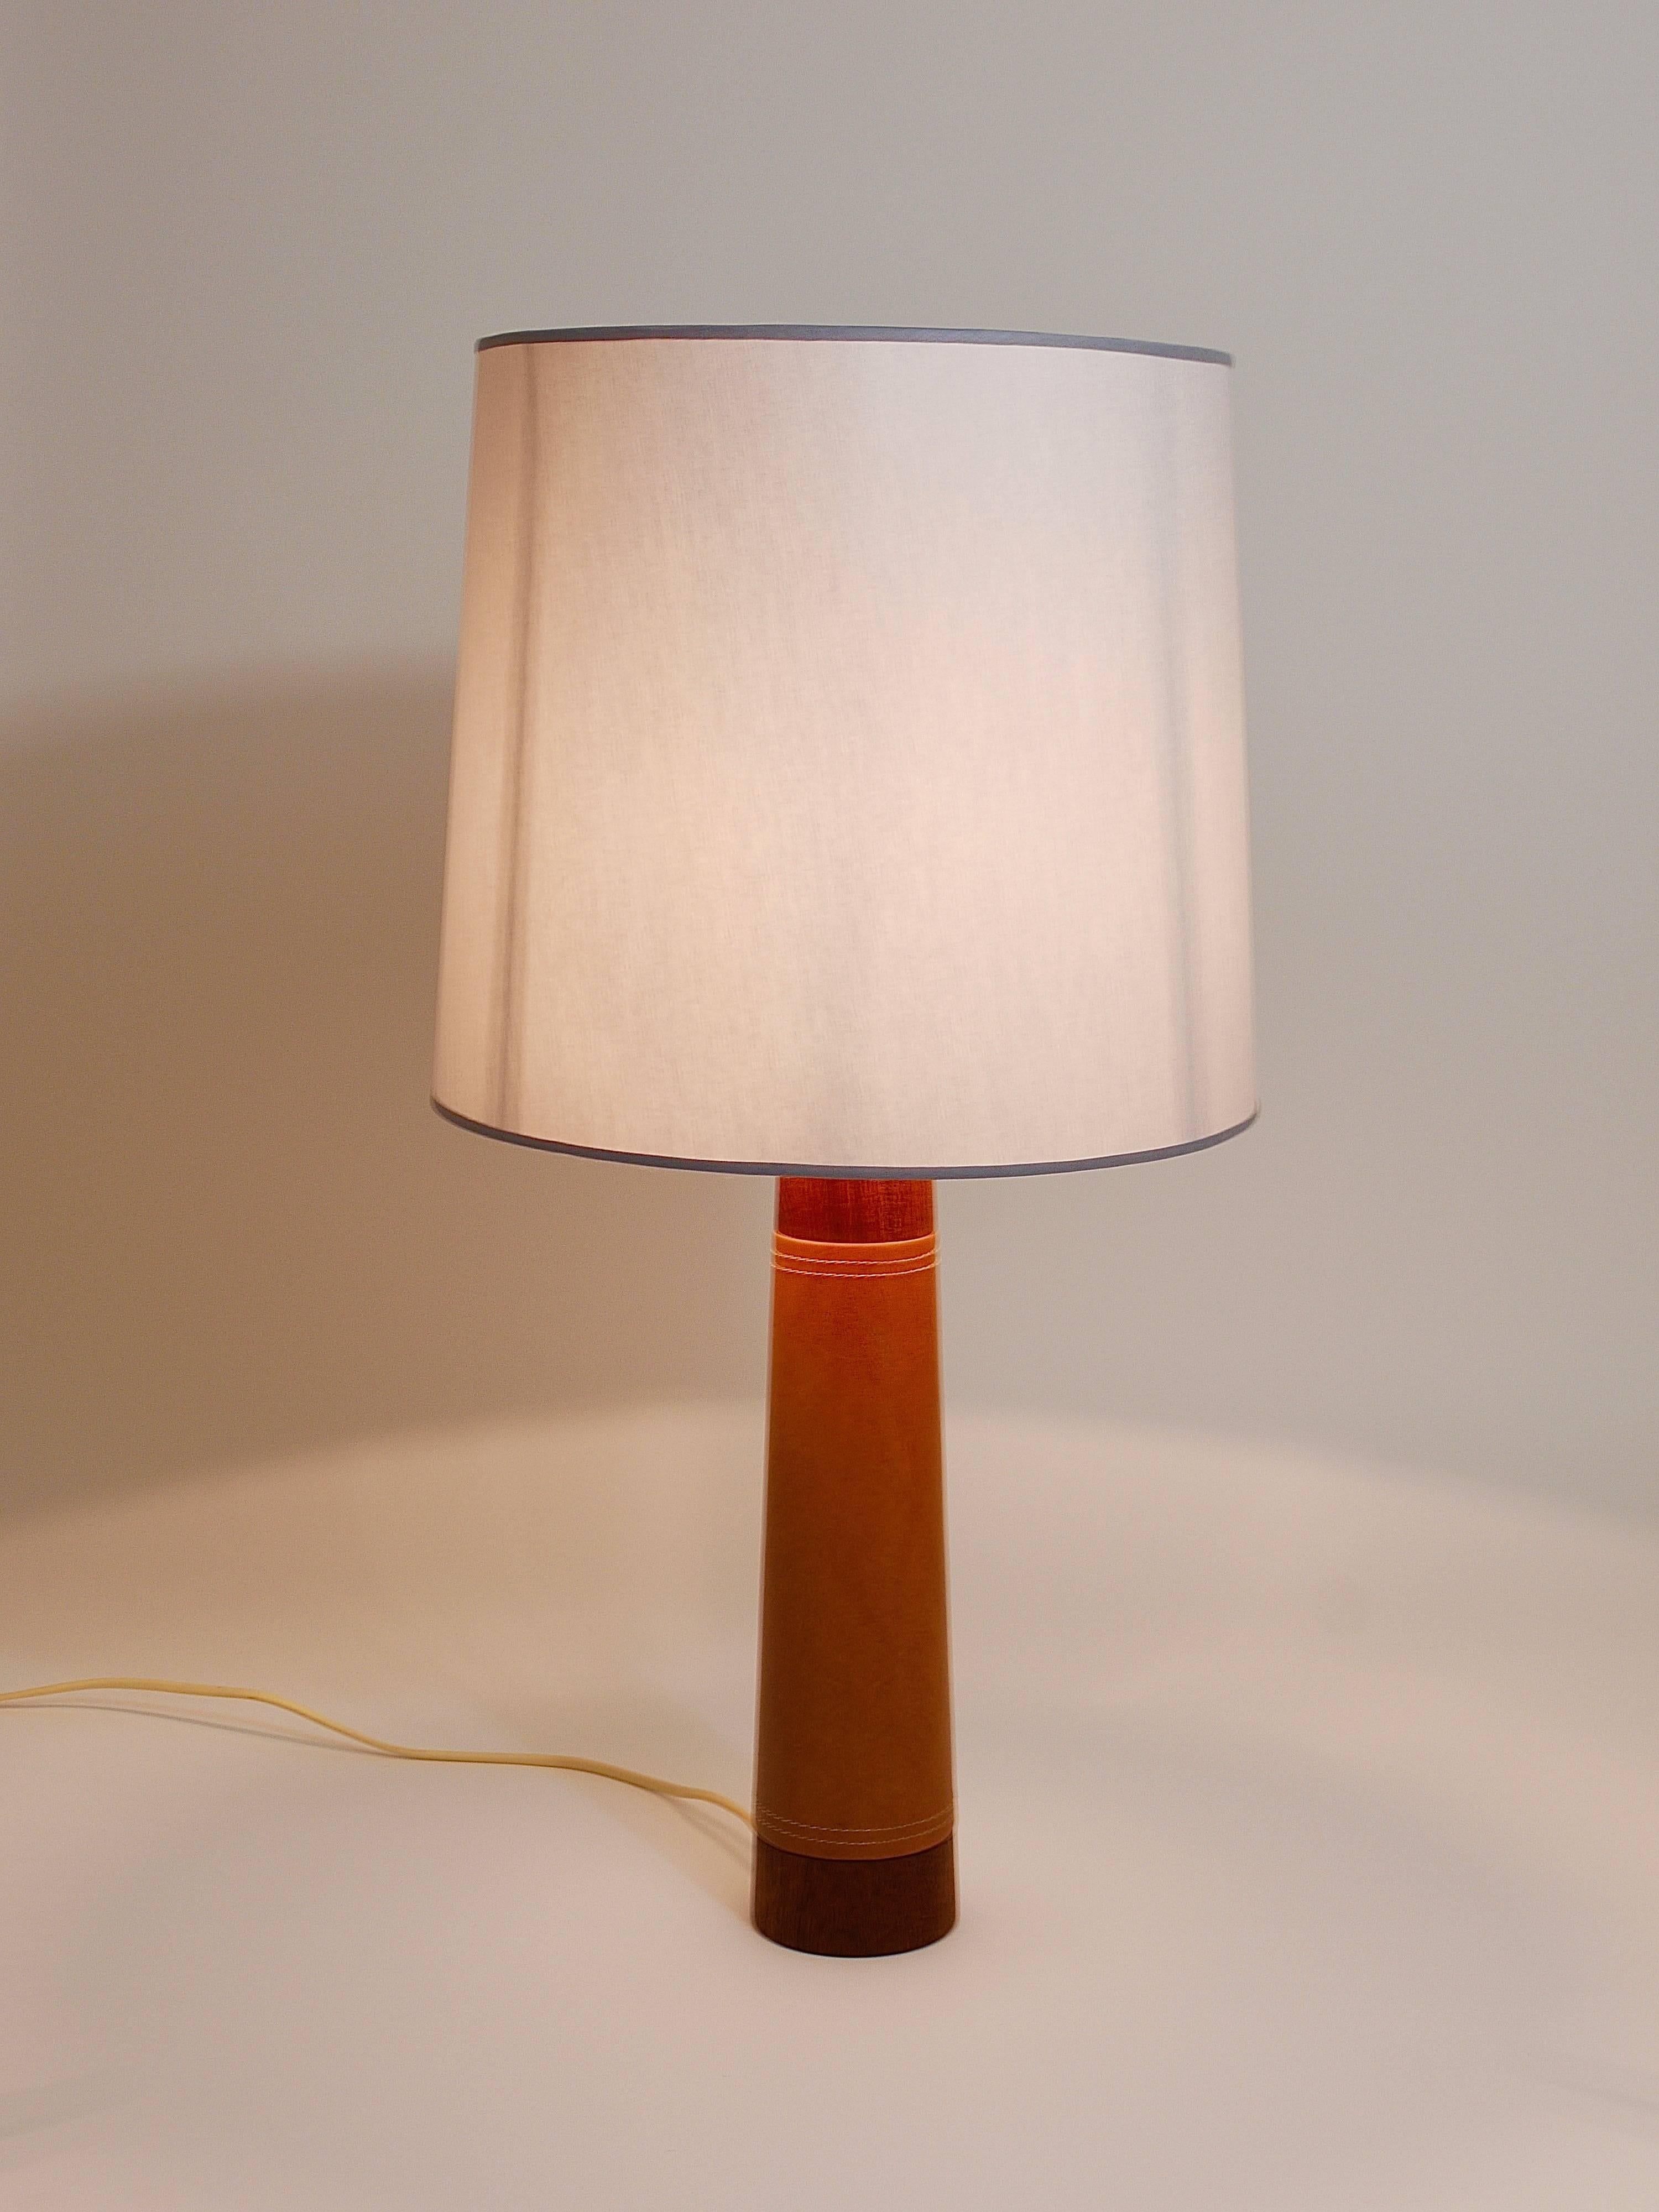 Beautiful Danish Midcentury Teak Leather Table Lamp, Denmark, 1950s In Excellent Condition For Sale In Vienna, AT